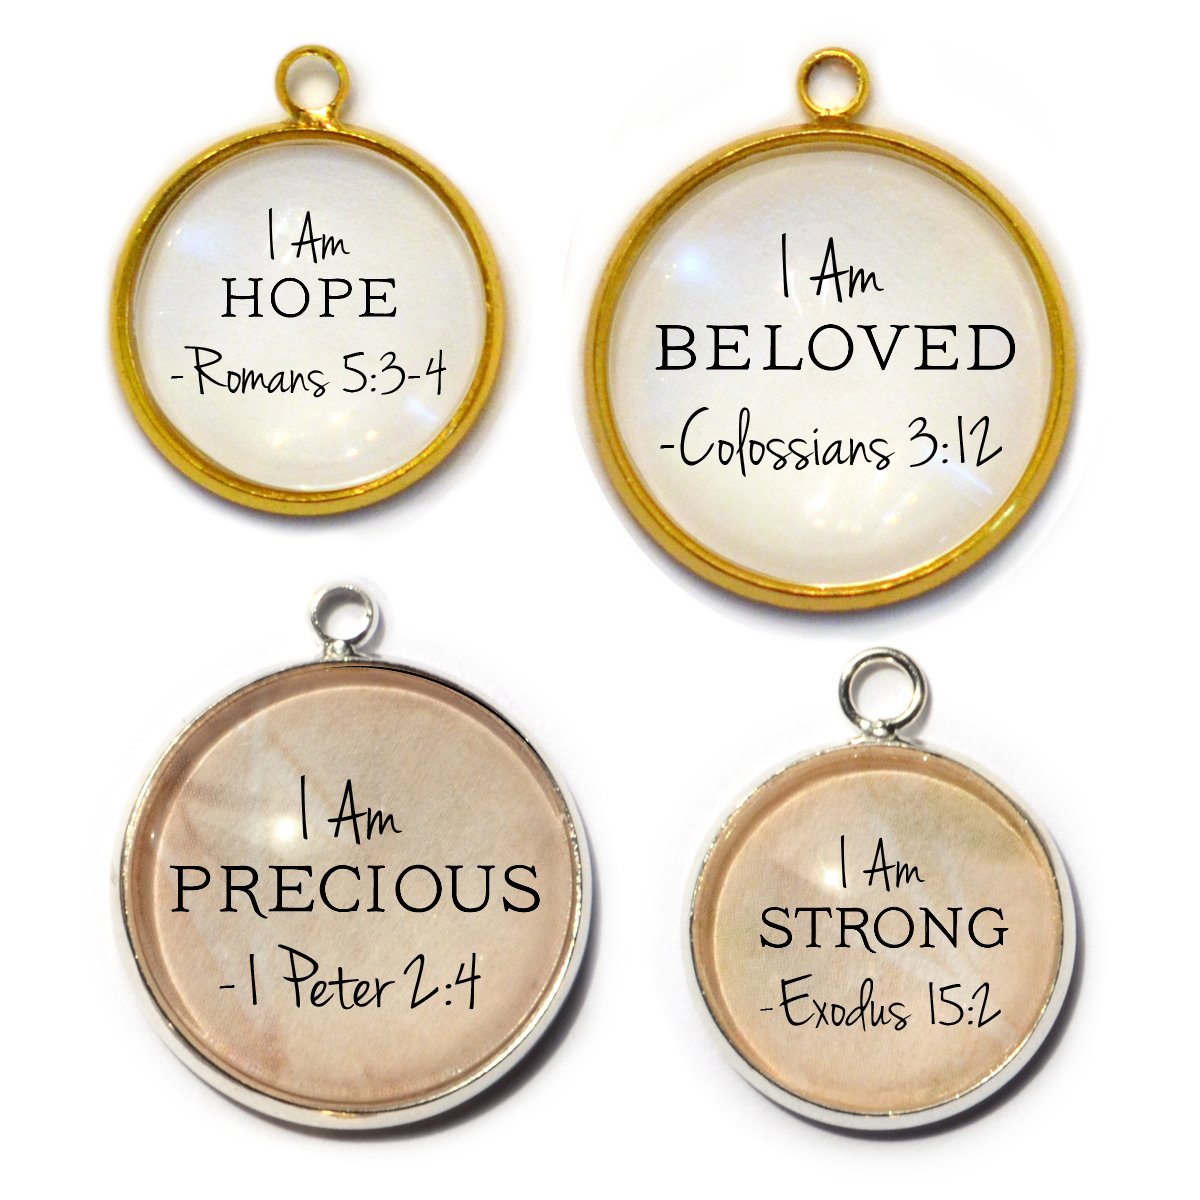 "I AM" Affirmations – Glass Scripture Charms for Jewelry Making, 20mm,